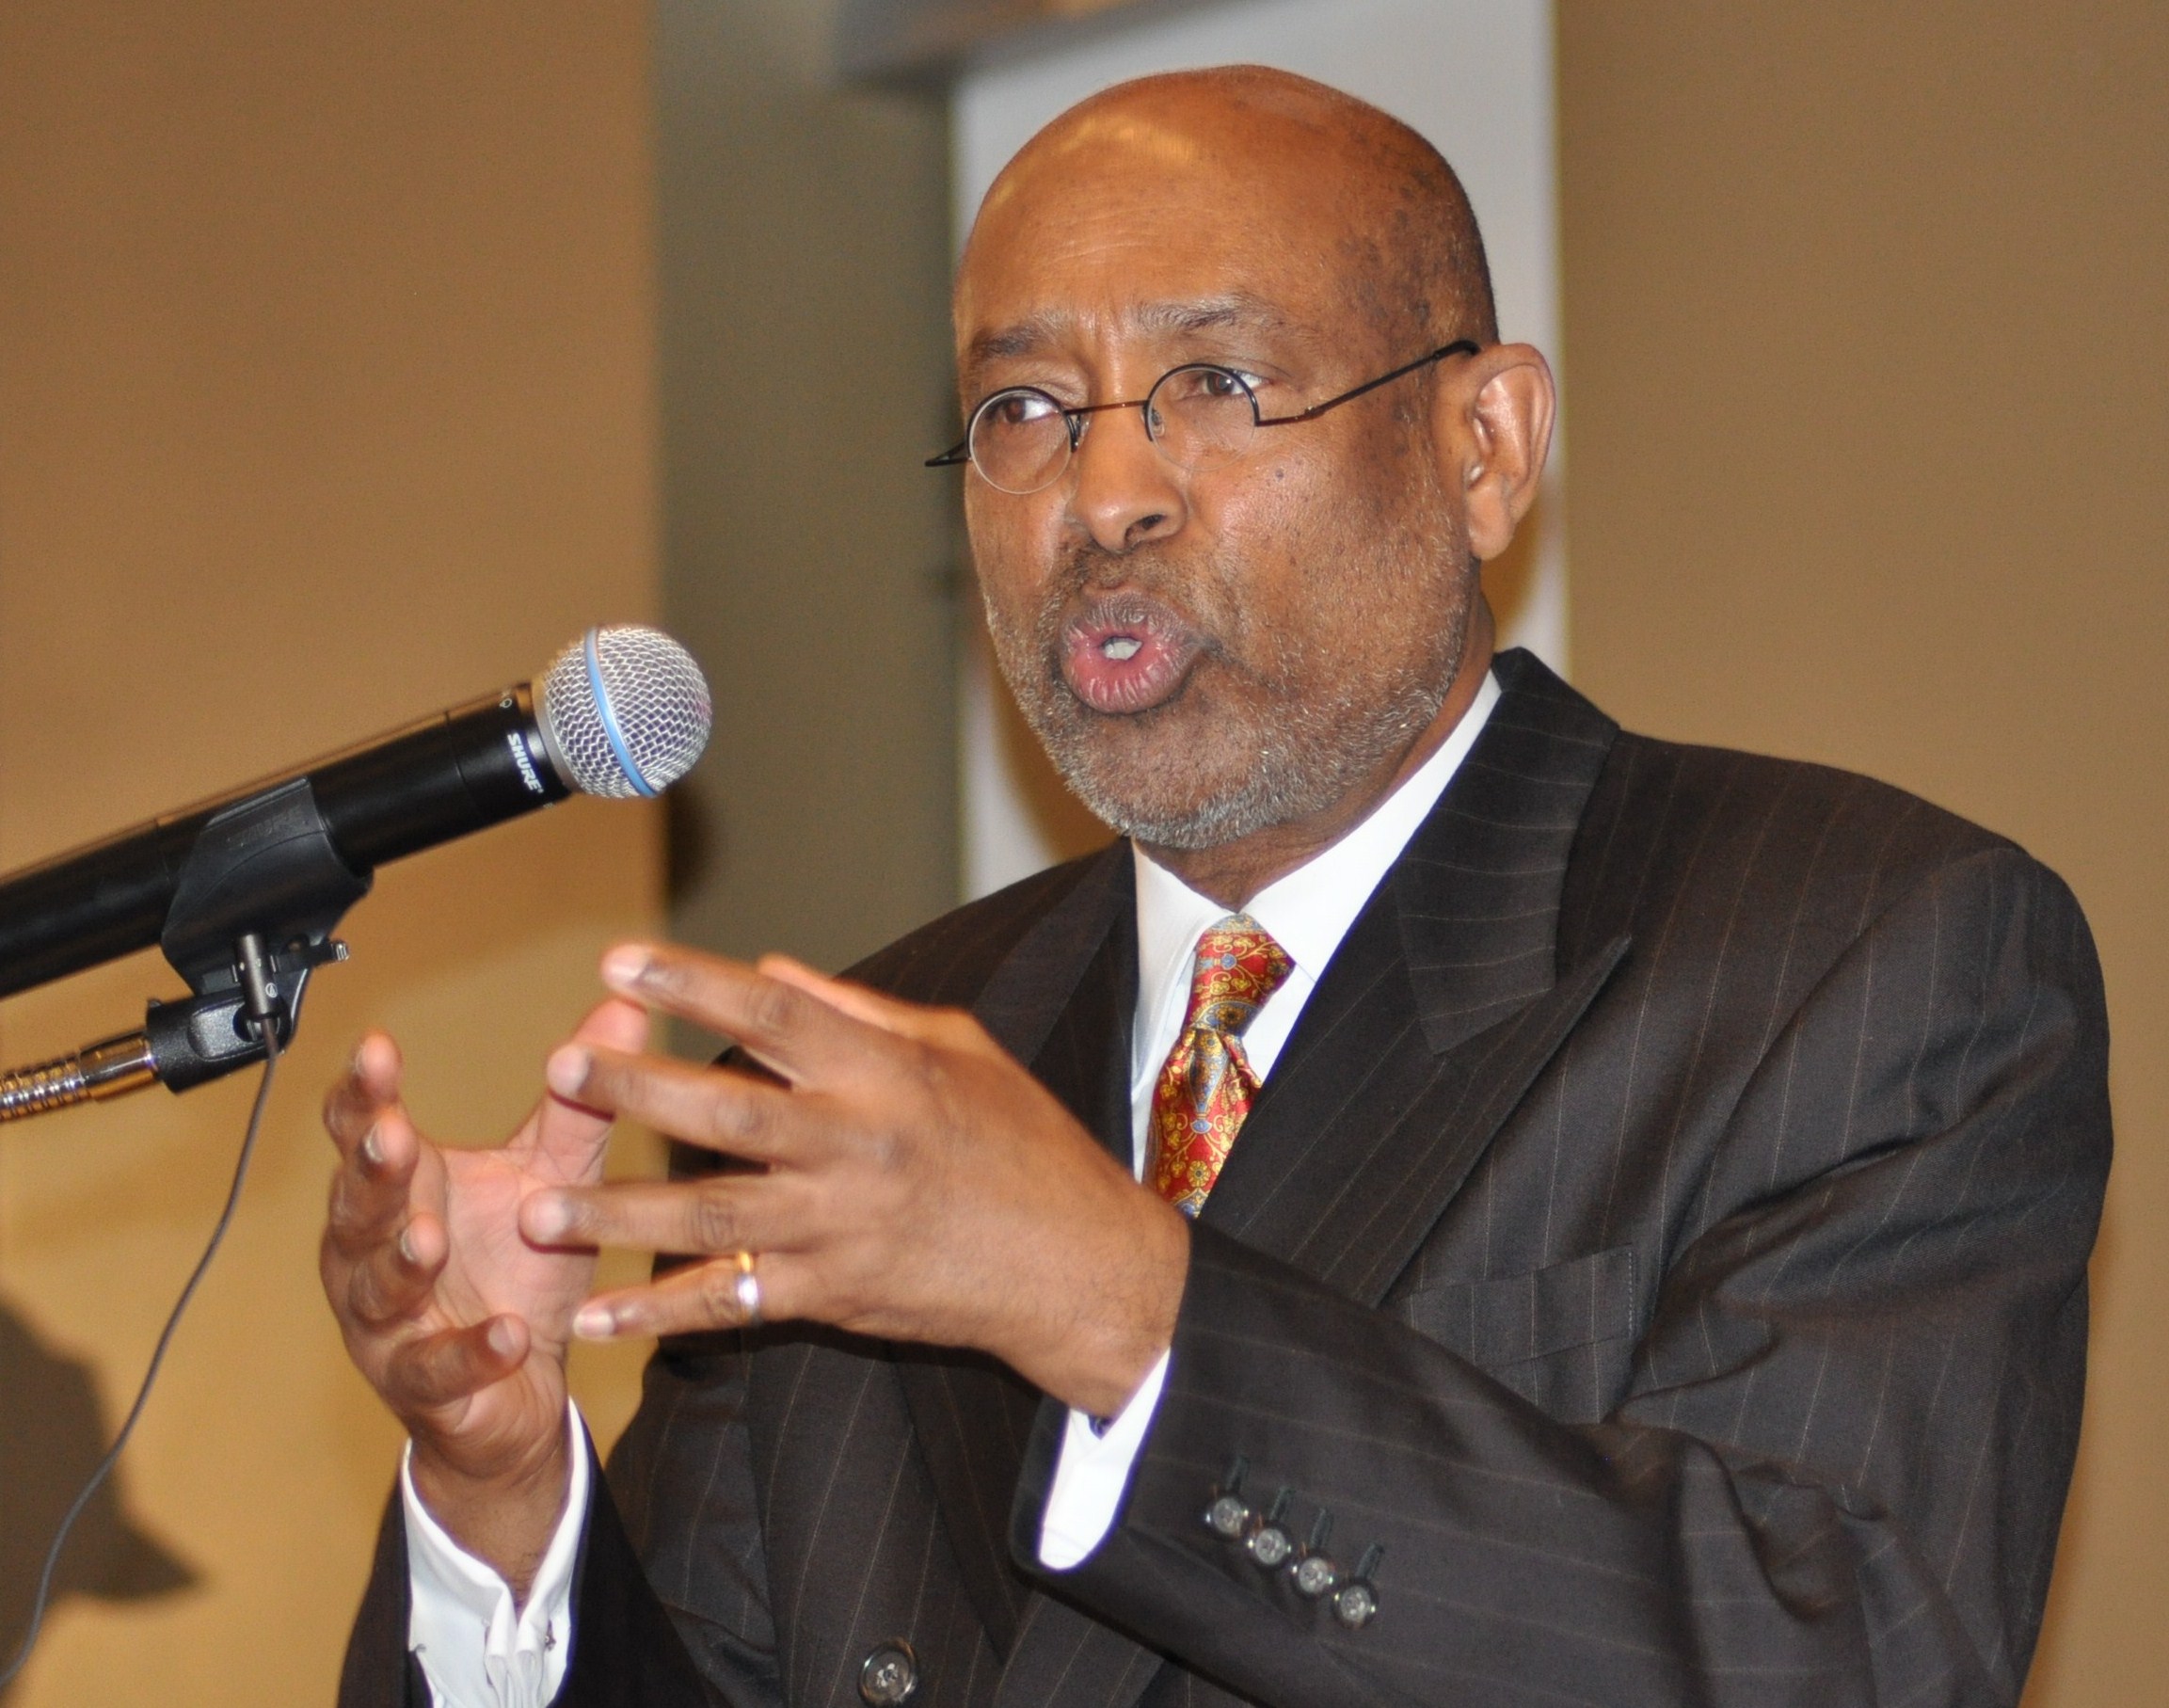 A man in a suit and tie speaking at a microphone.